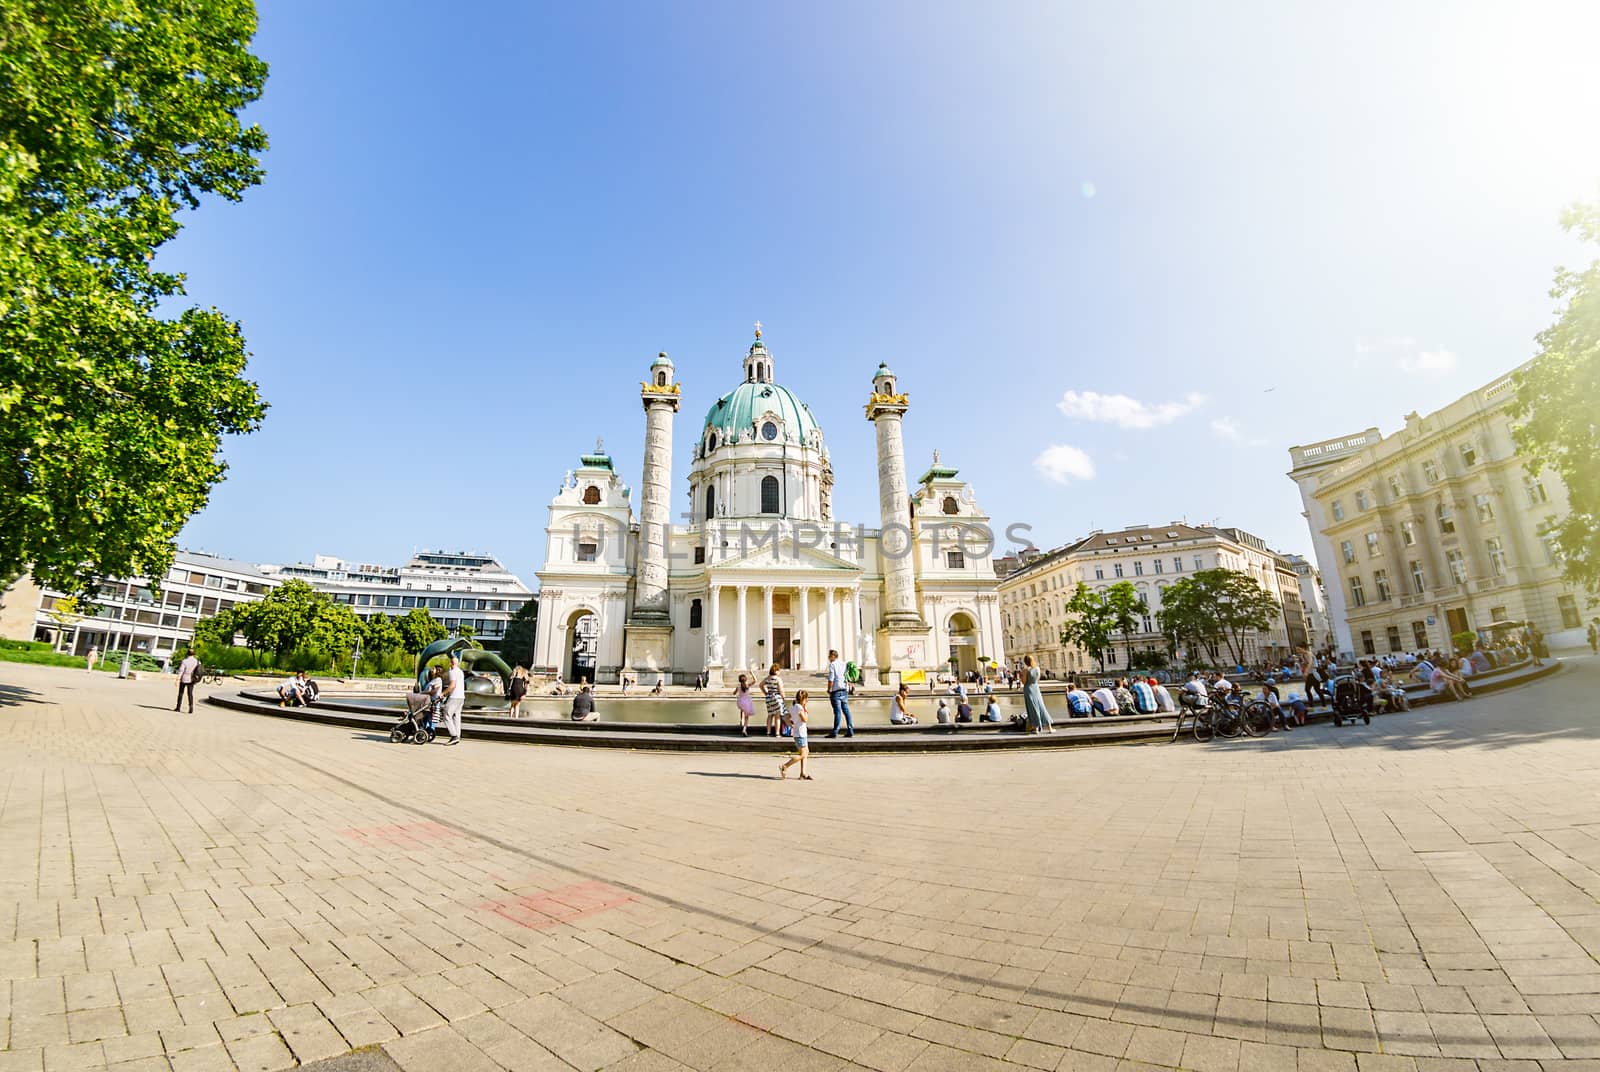 Vienna, Austria - June 7 2019: St. Charles Church (Karlskirche), is a baroque church located on the south side of Karlsplatz in Vienna, Austria. Widely considered the most outstanding baroque church. by MysteryShot